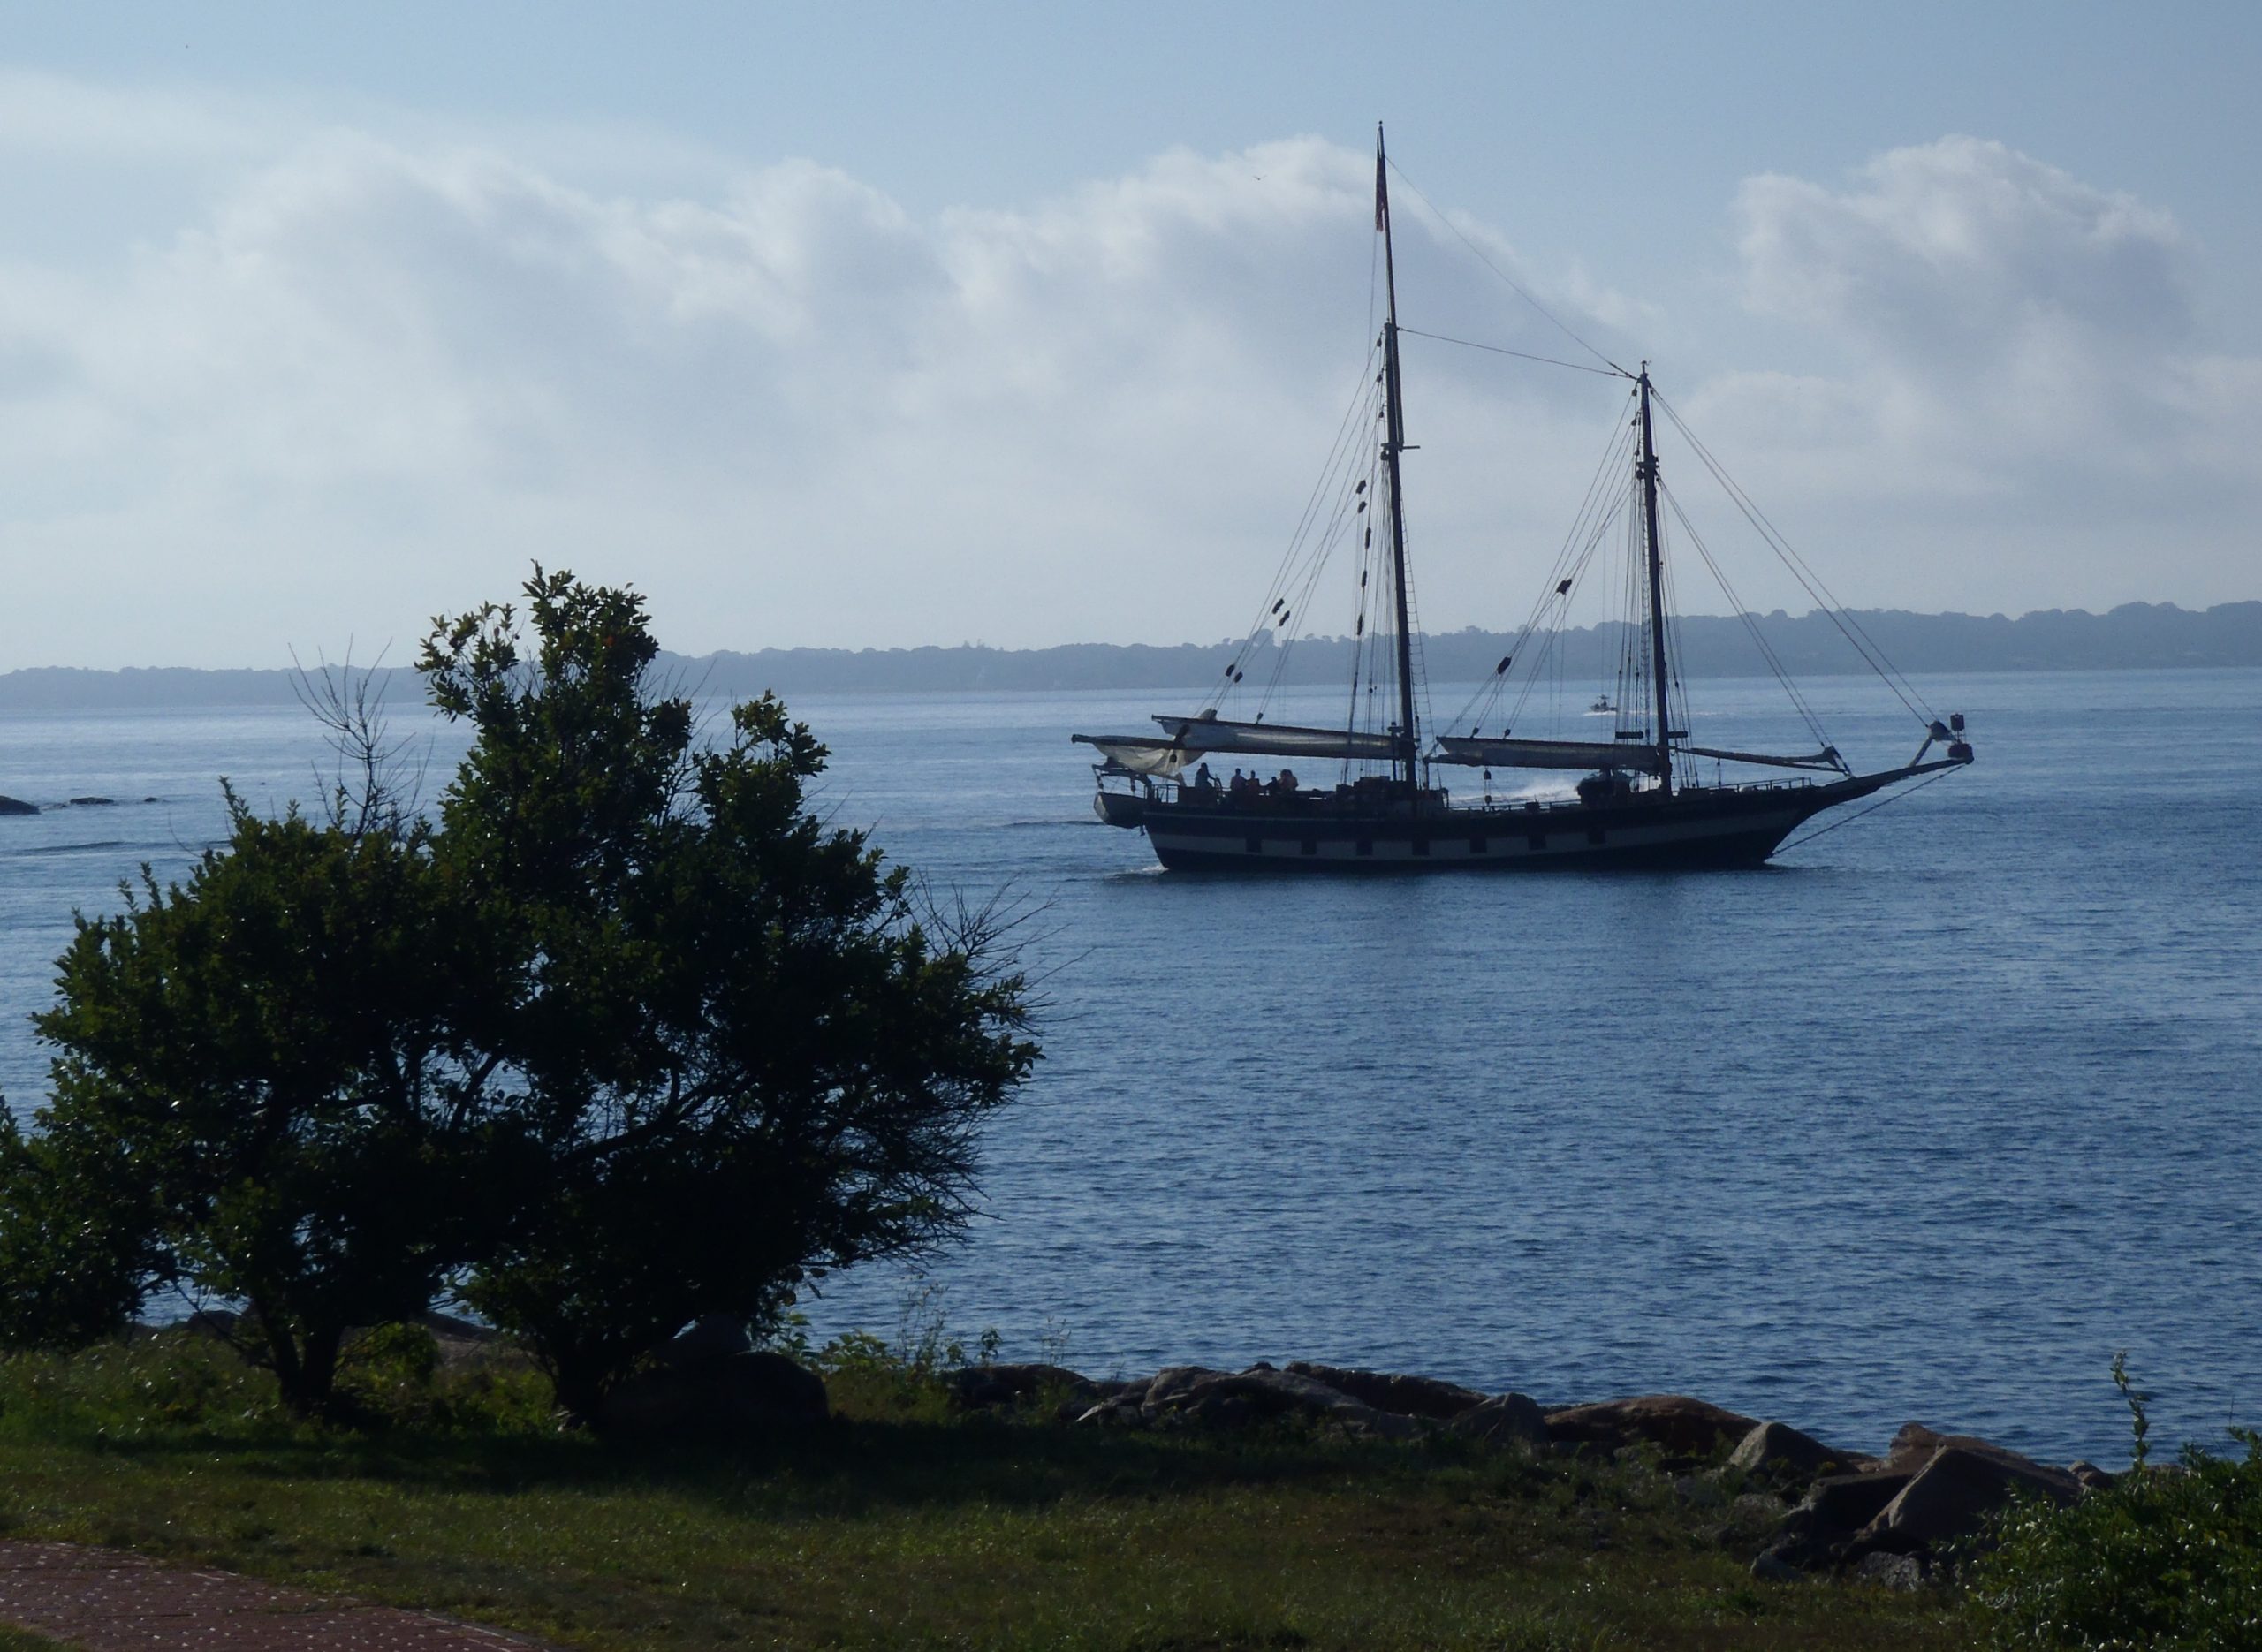 Coastline in foreground with large bush on left.  Blue water beyond with a sailing vessel on the water